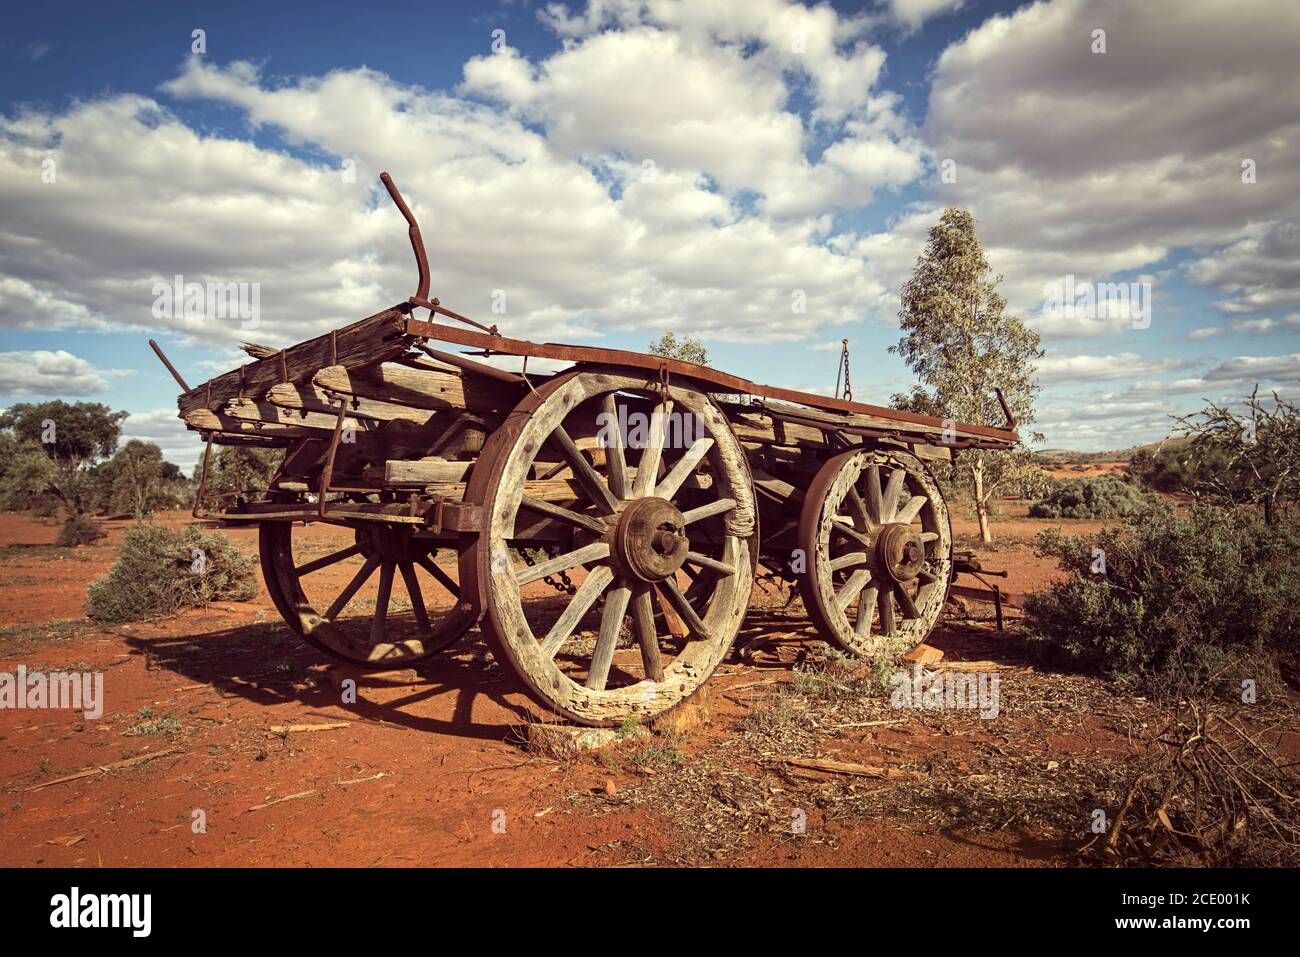 Australia  Outback savanna with an old vintage derelict horse-drawn carriage at the bush under cloudy sky Stock Photo